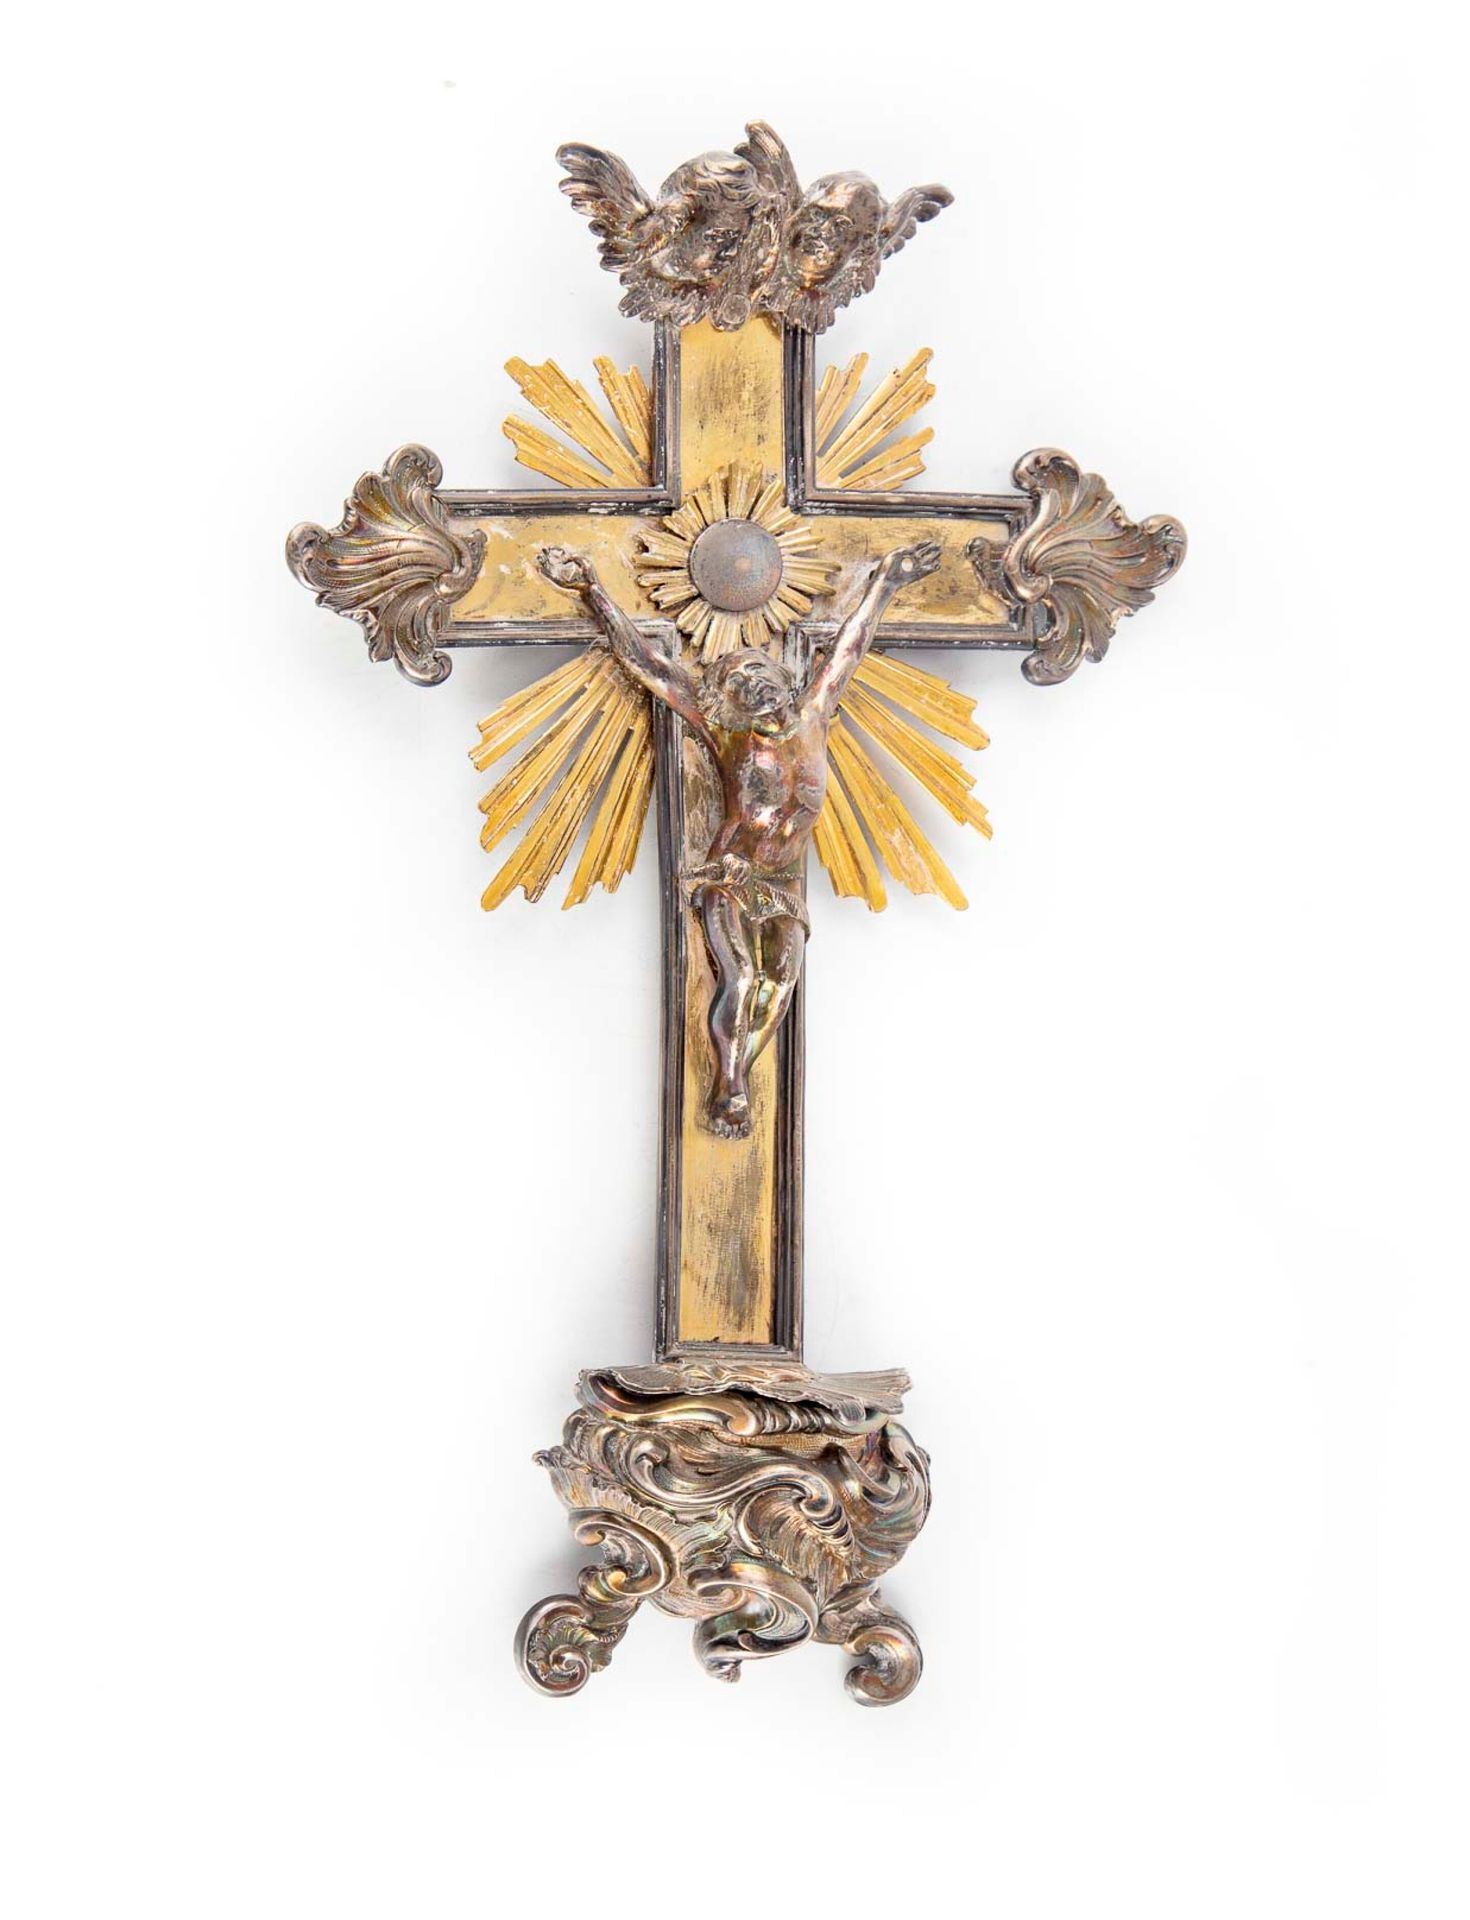 Null Silver and brass crucifix forming a holy water font

19th century

H. 37 cm